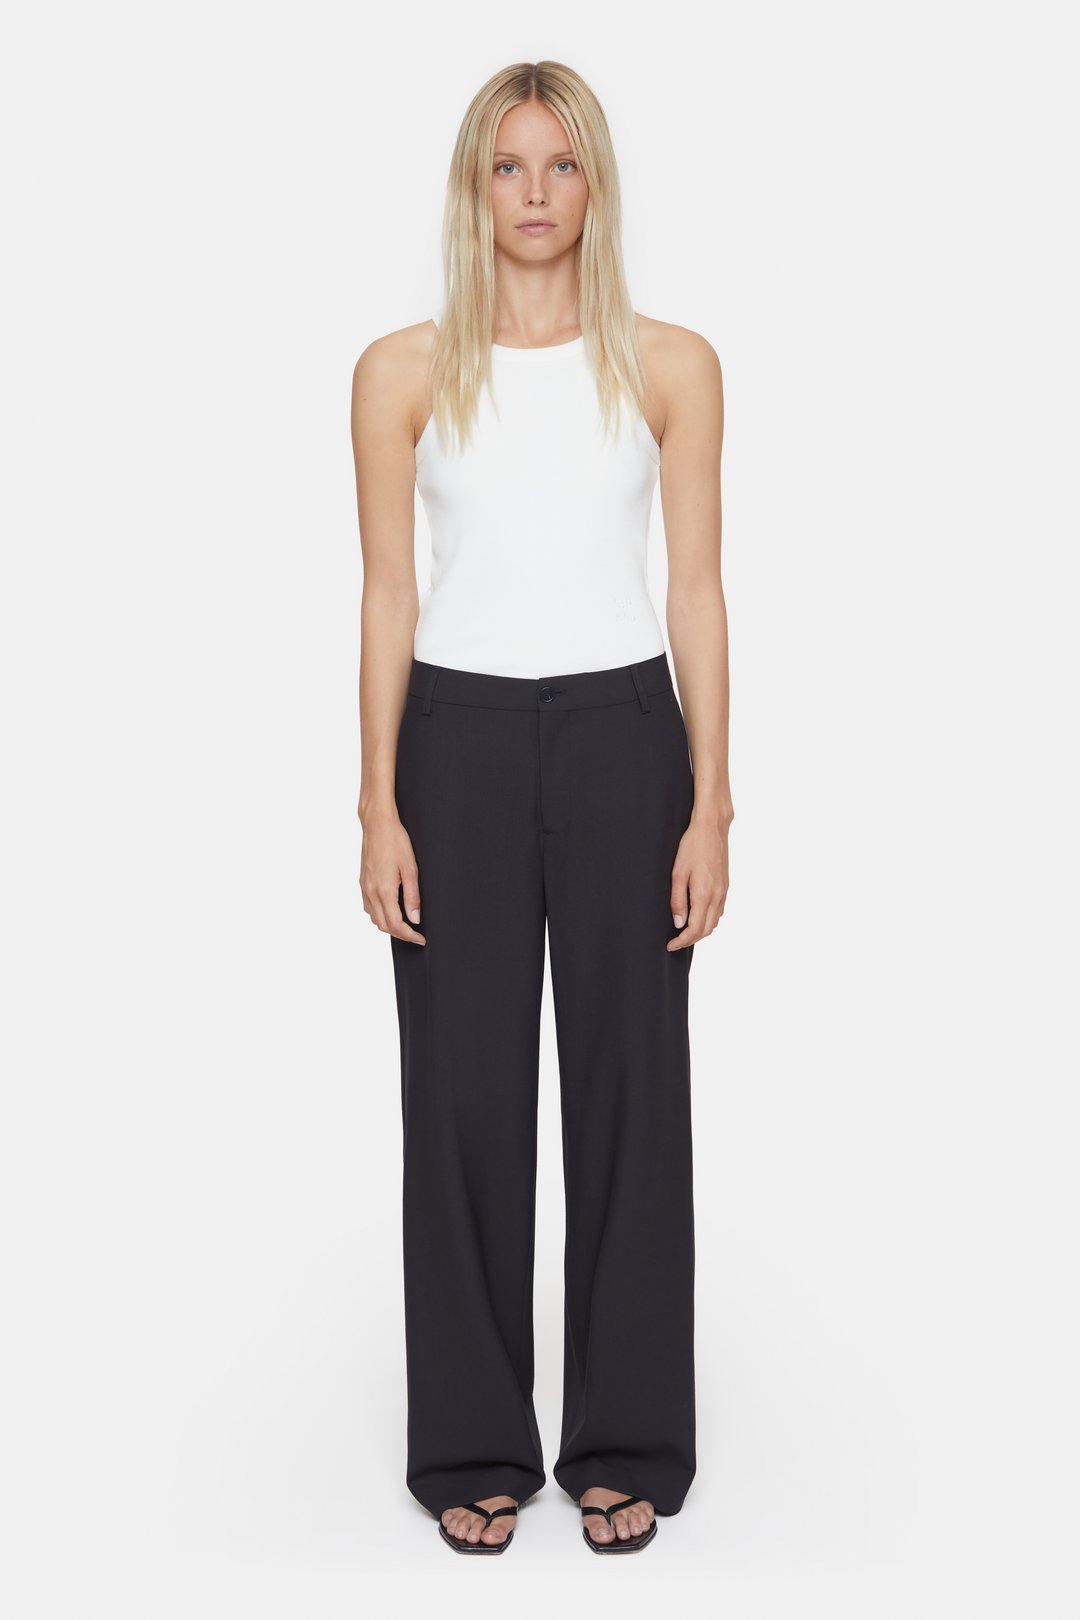 RELAXED PANTS - STYLE NAME JURDY